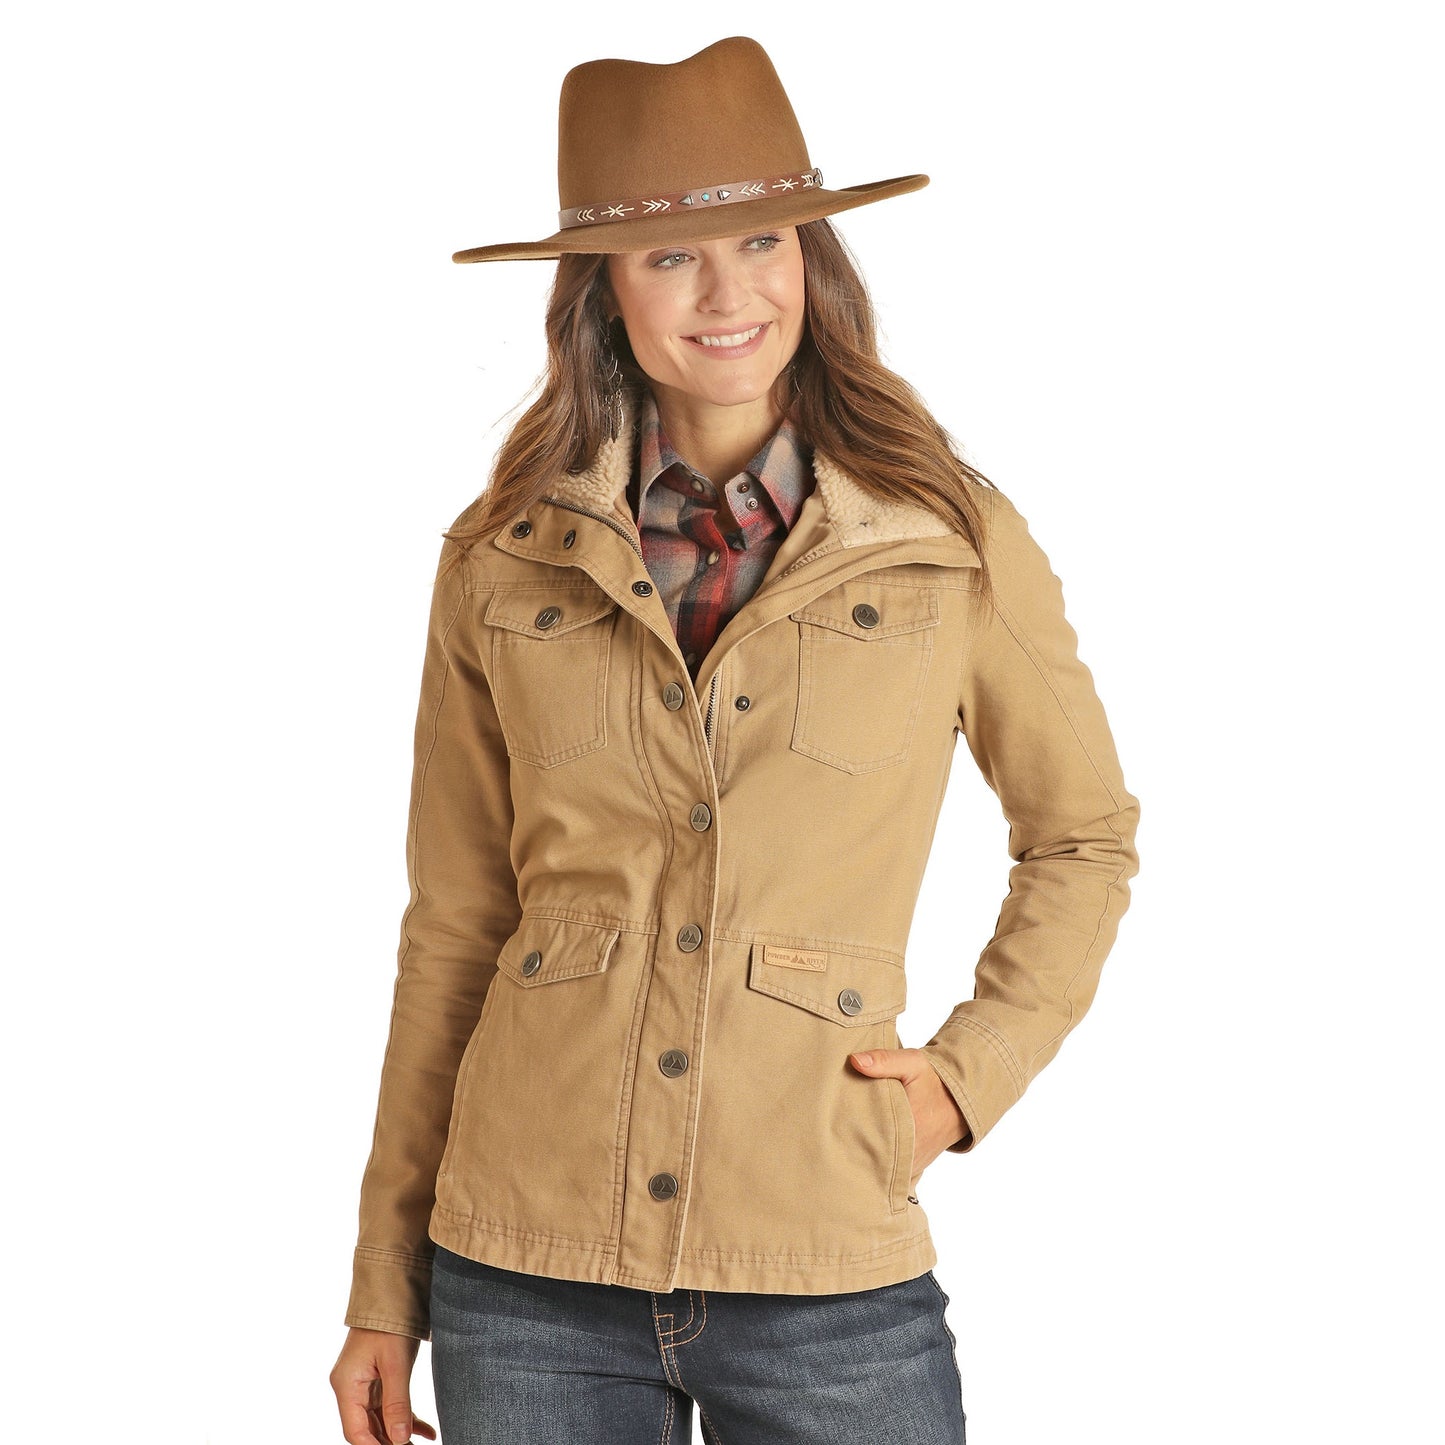 Powder River Outfitters Ladies Tan Canvas Rancher Jacket 52-1029-27